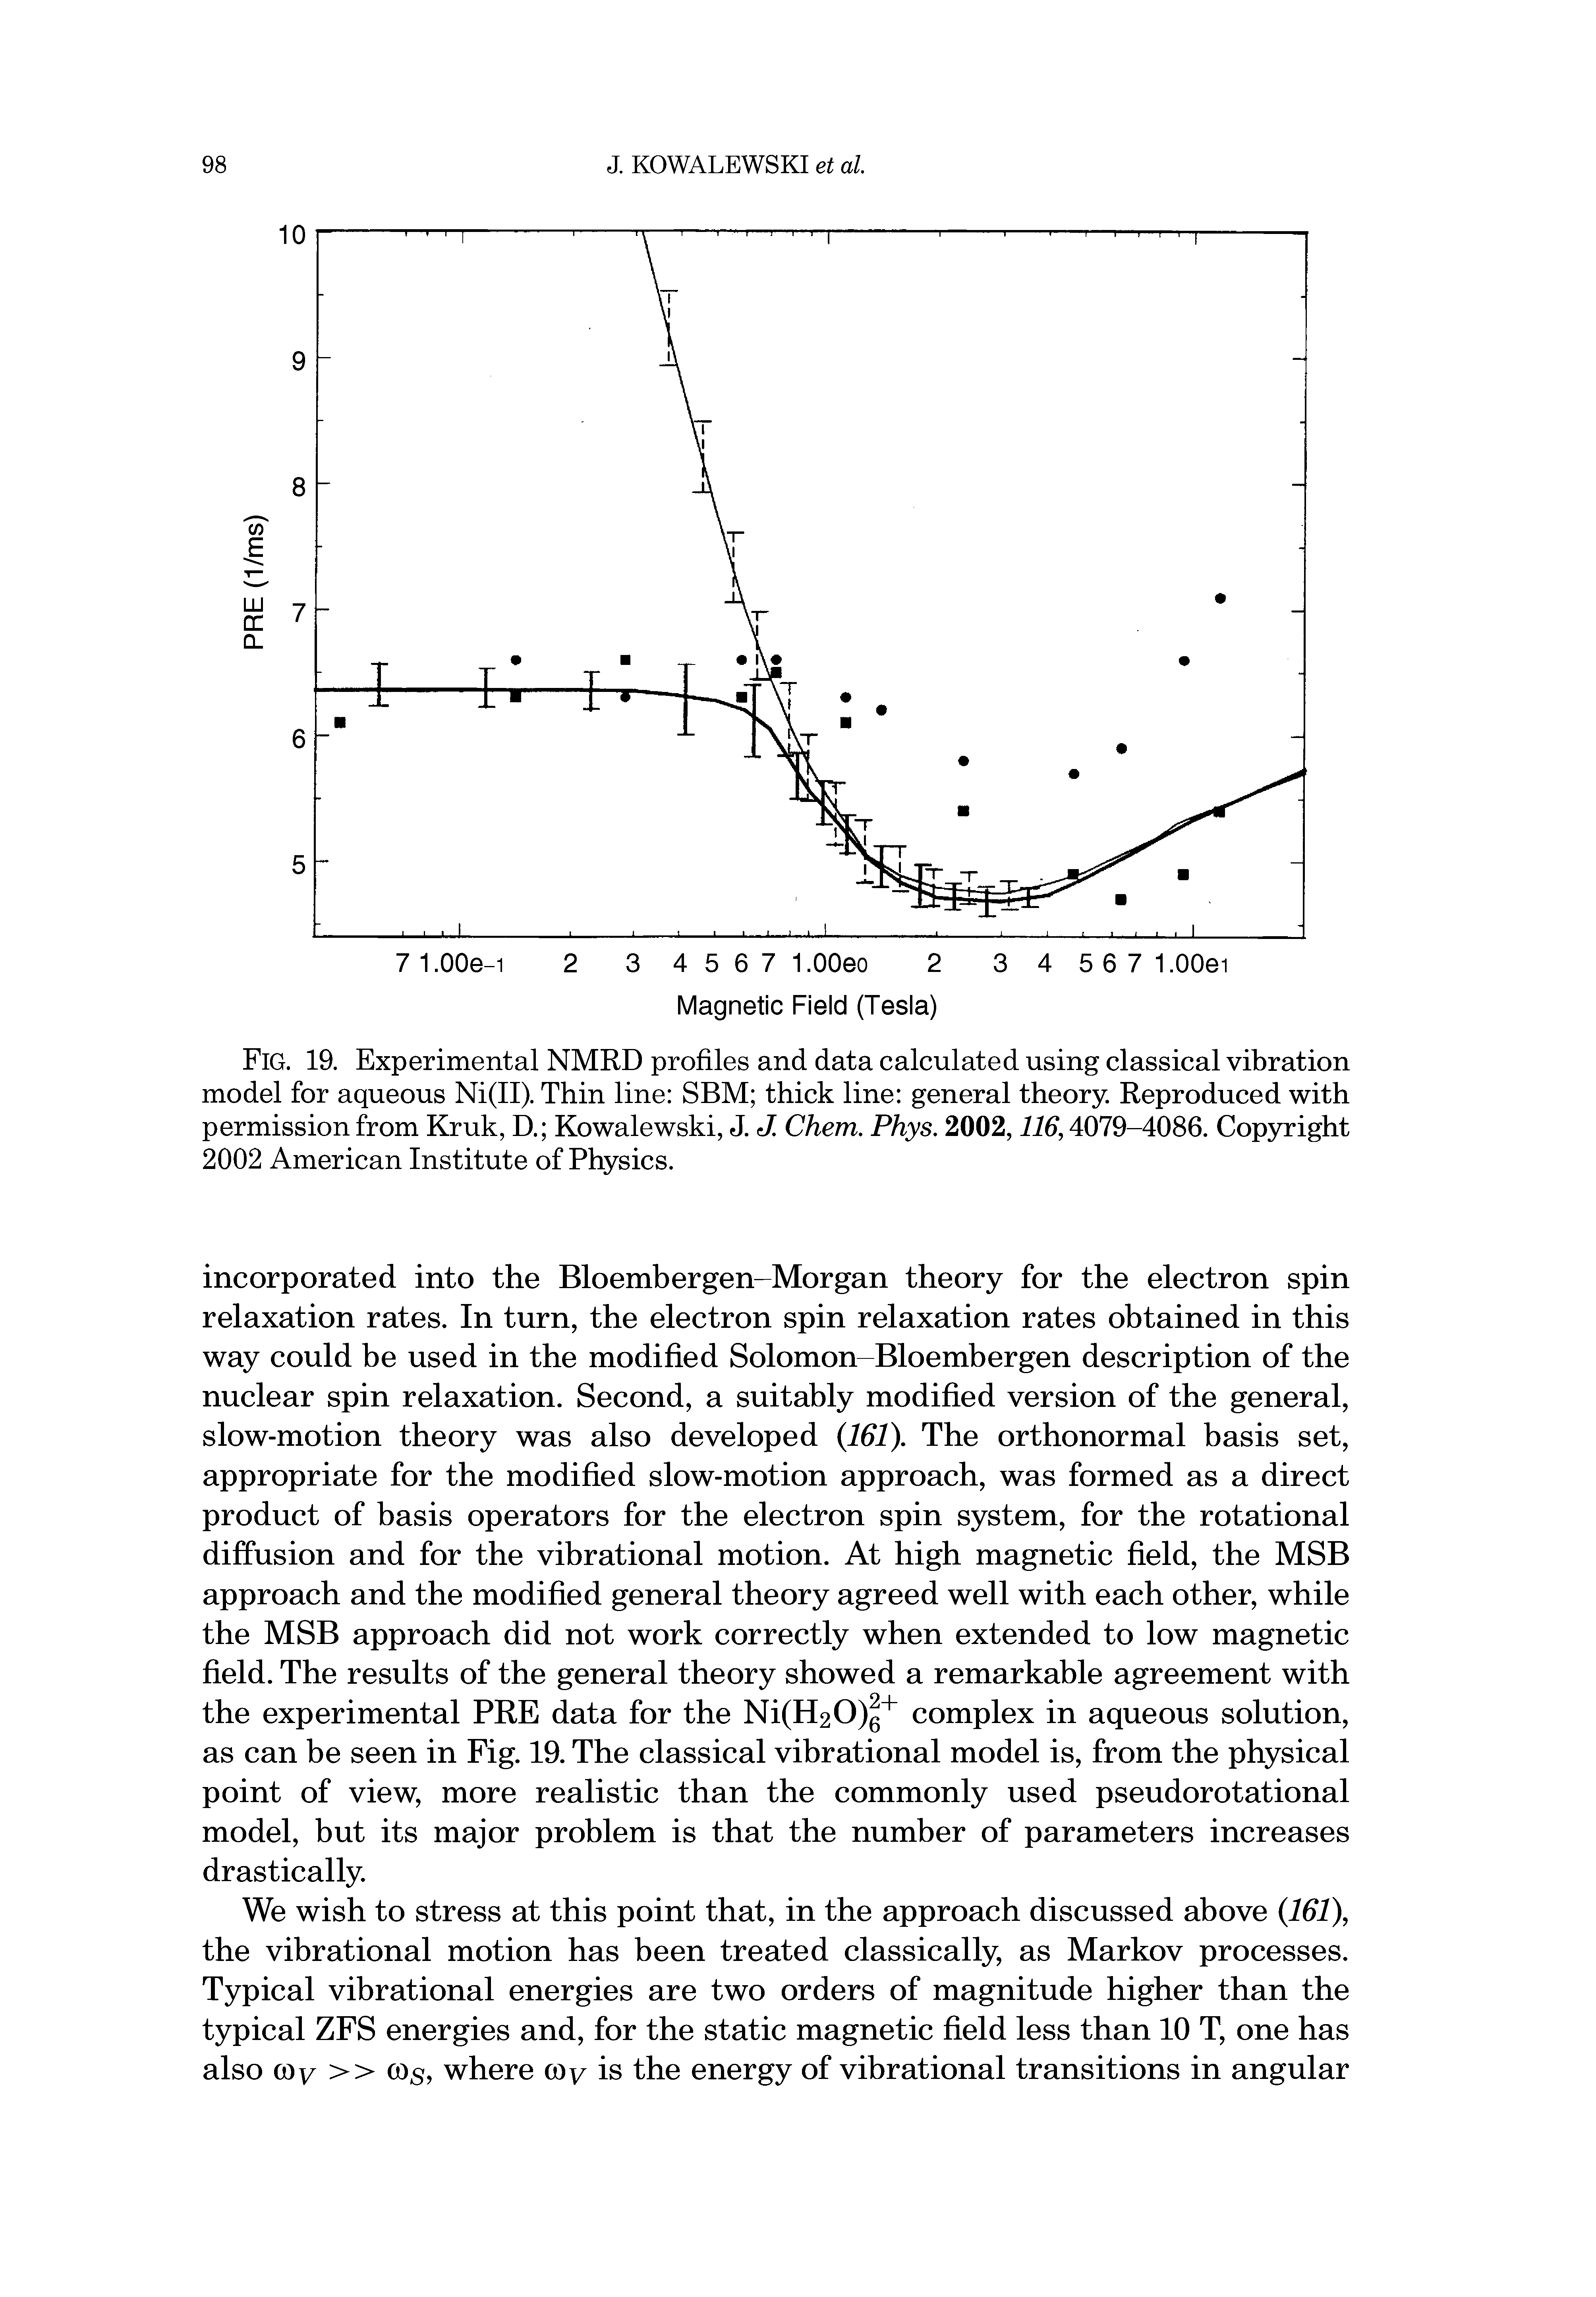 Fig. 19. Experimental NMRD profiles and data calculated using classical vibration model for aqueous Ni(II). Thin line SBM thick line general theory. Reproduced with permission from Kruk, D. Kowalewski, J. J. Chem. Phys. 2002,116,4079-4086. Copyright 2002 American Institute of Physics.